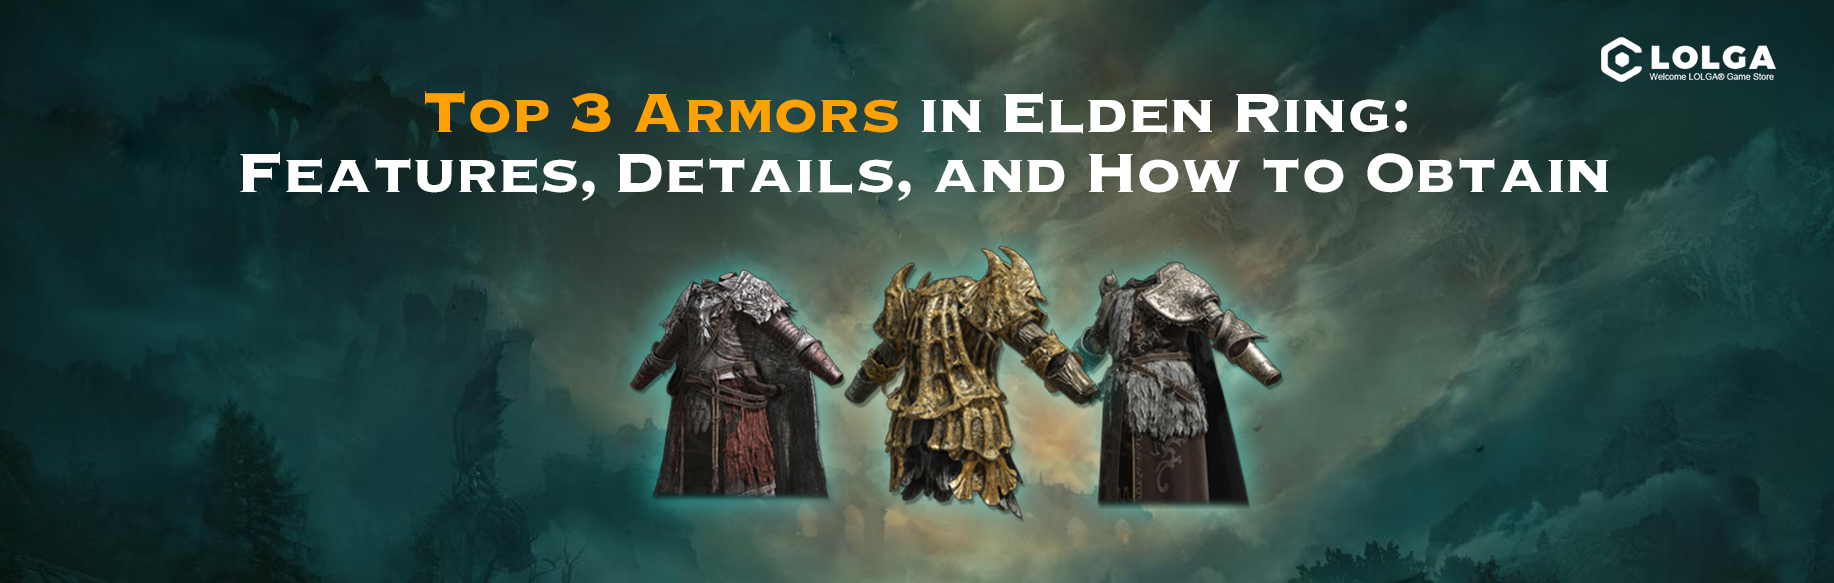 Top 3 Armors in Elden Ring: Features, Details, and How to Obtain